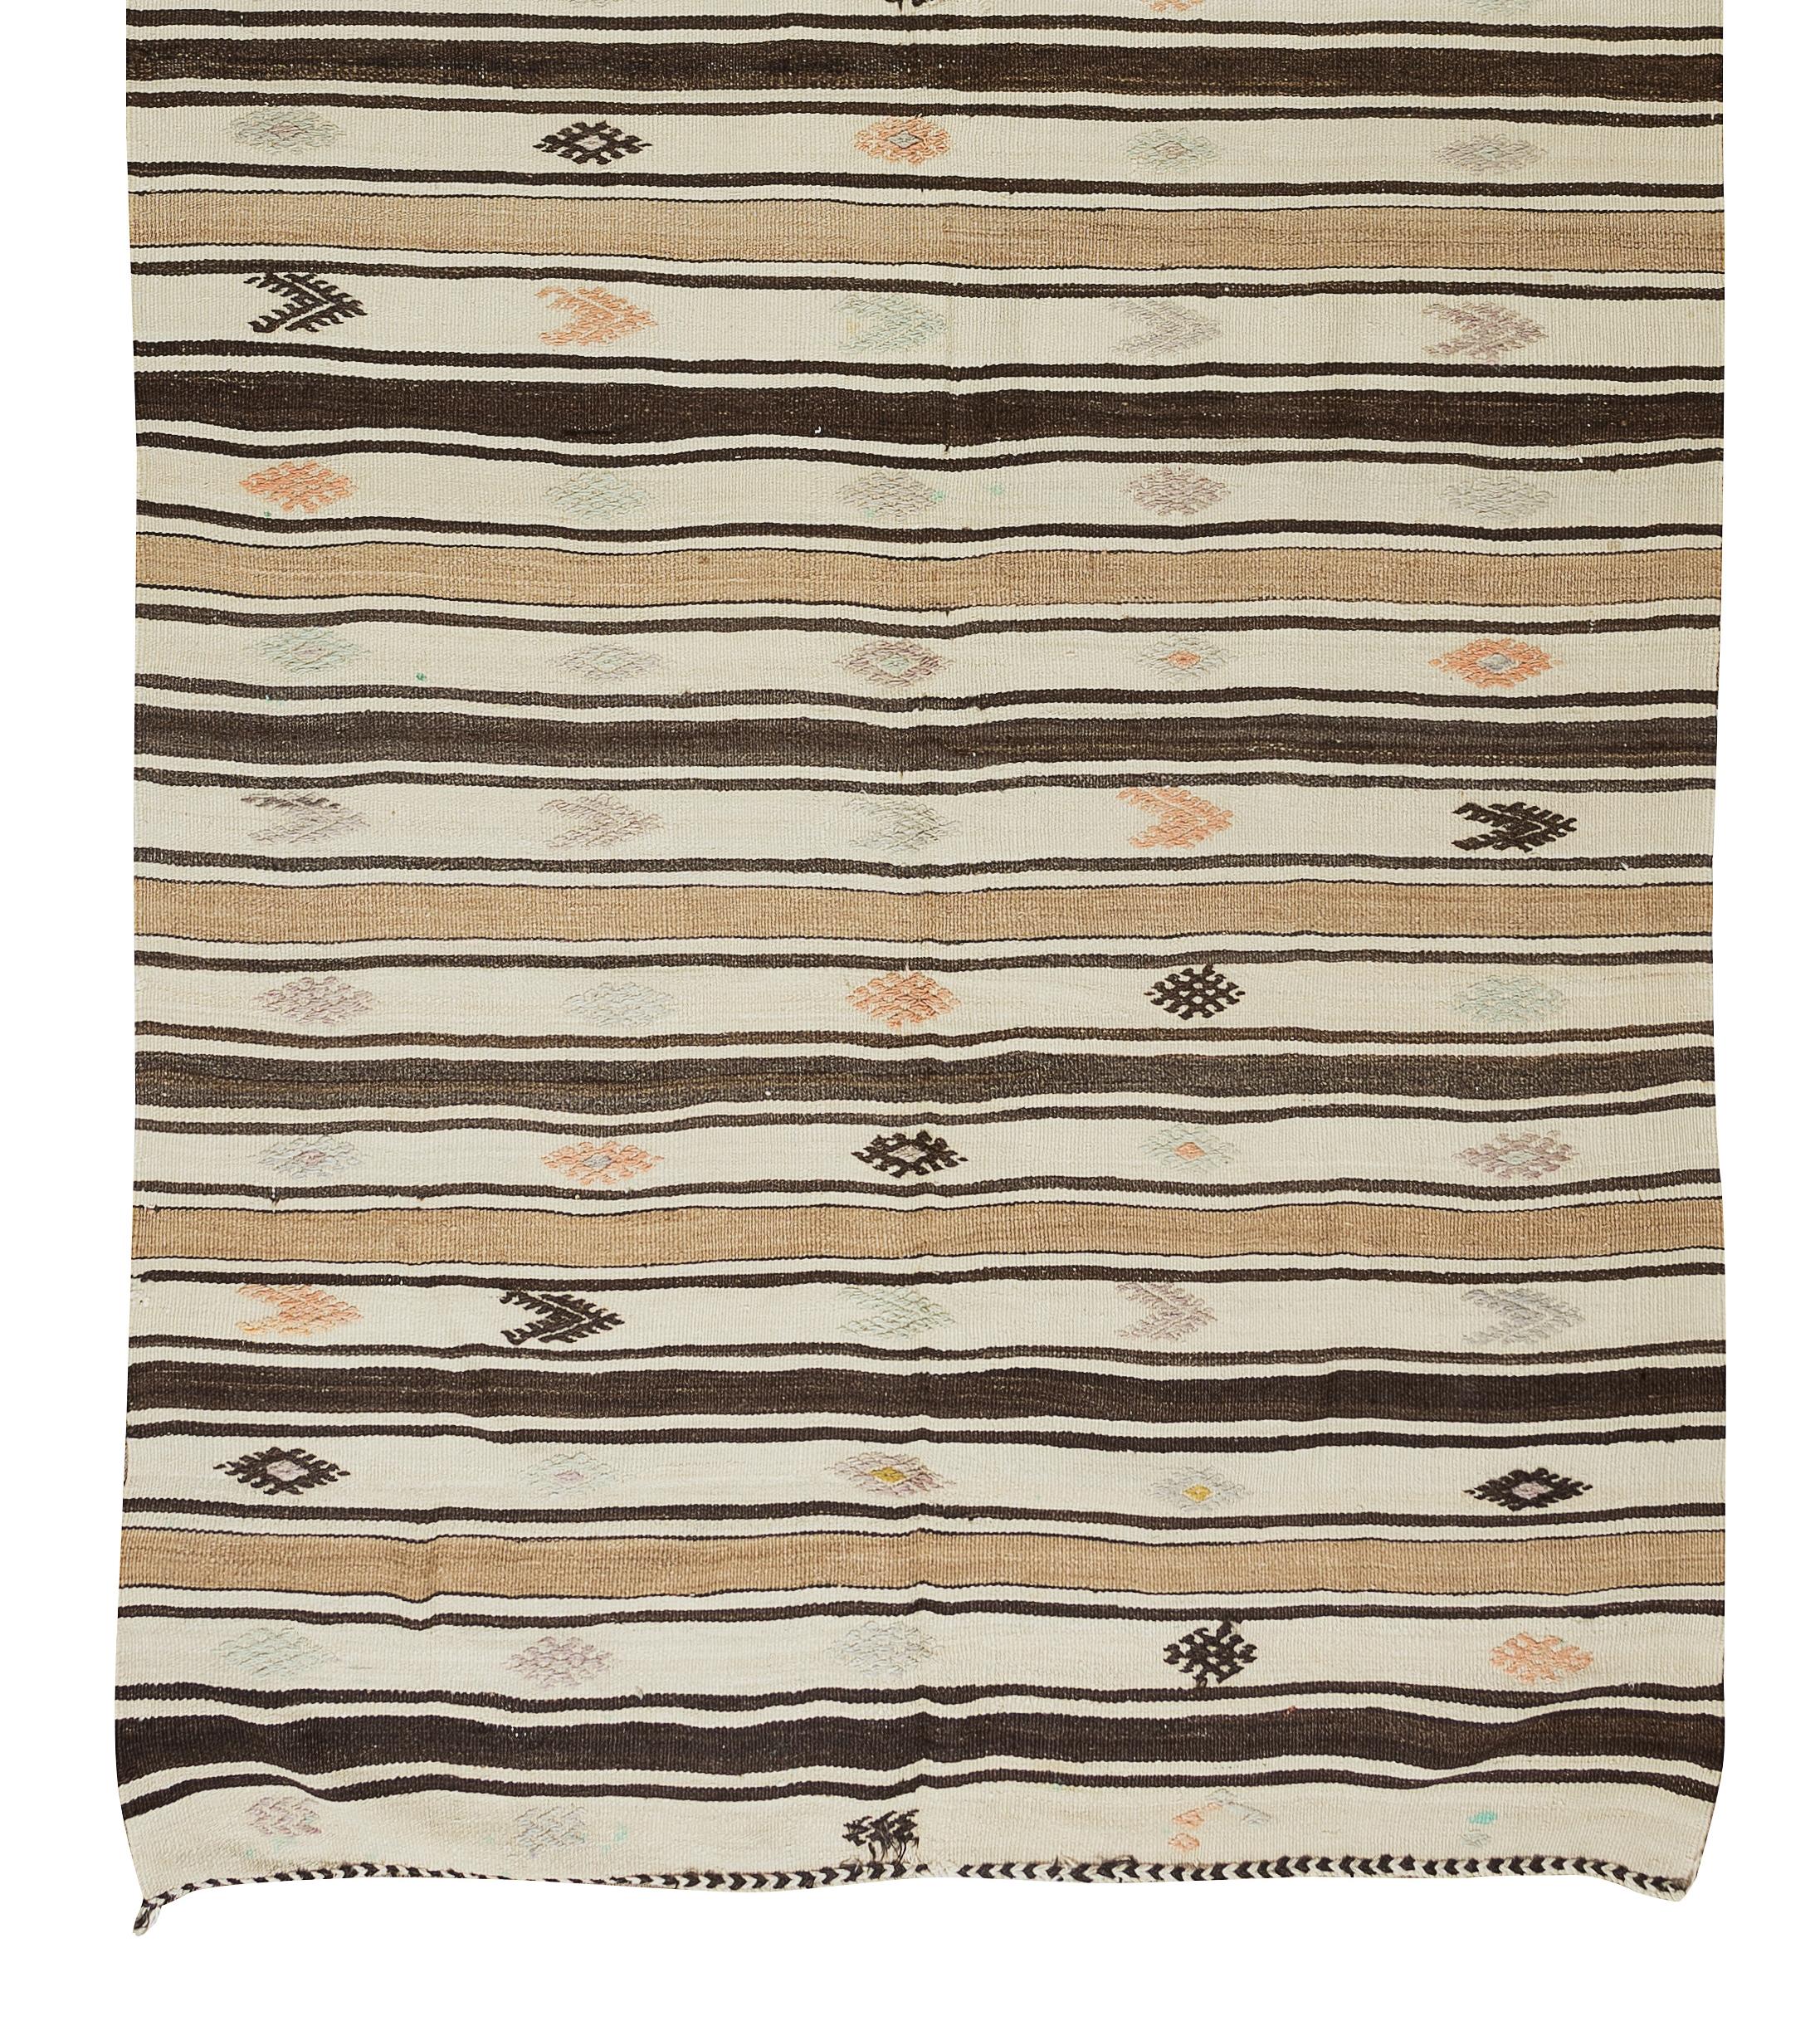 20th Century 4.8x11.5 Ft Vintage Striped Hand Woven Turkish Wool Kilim Runner, Flat-Weave Rug For Sale